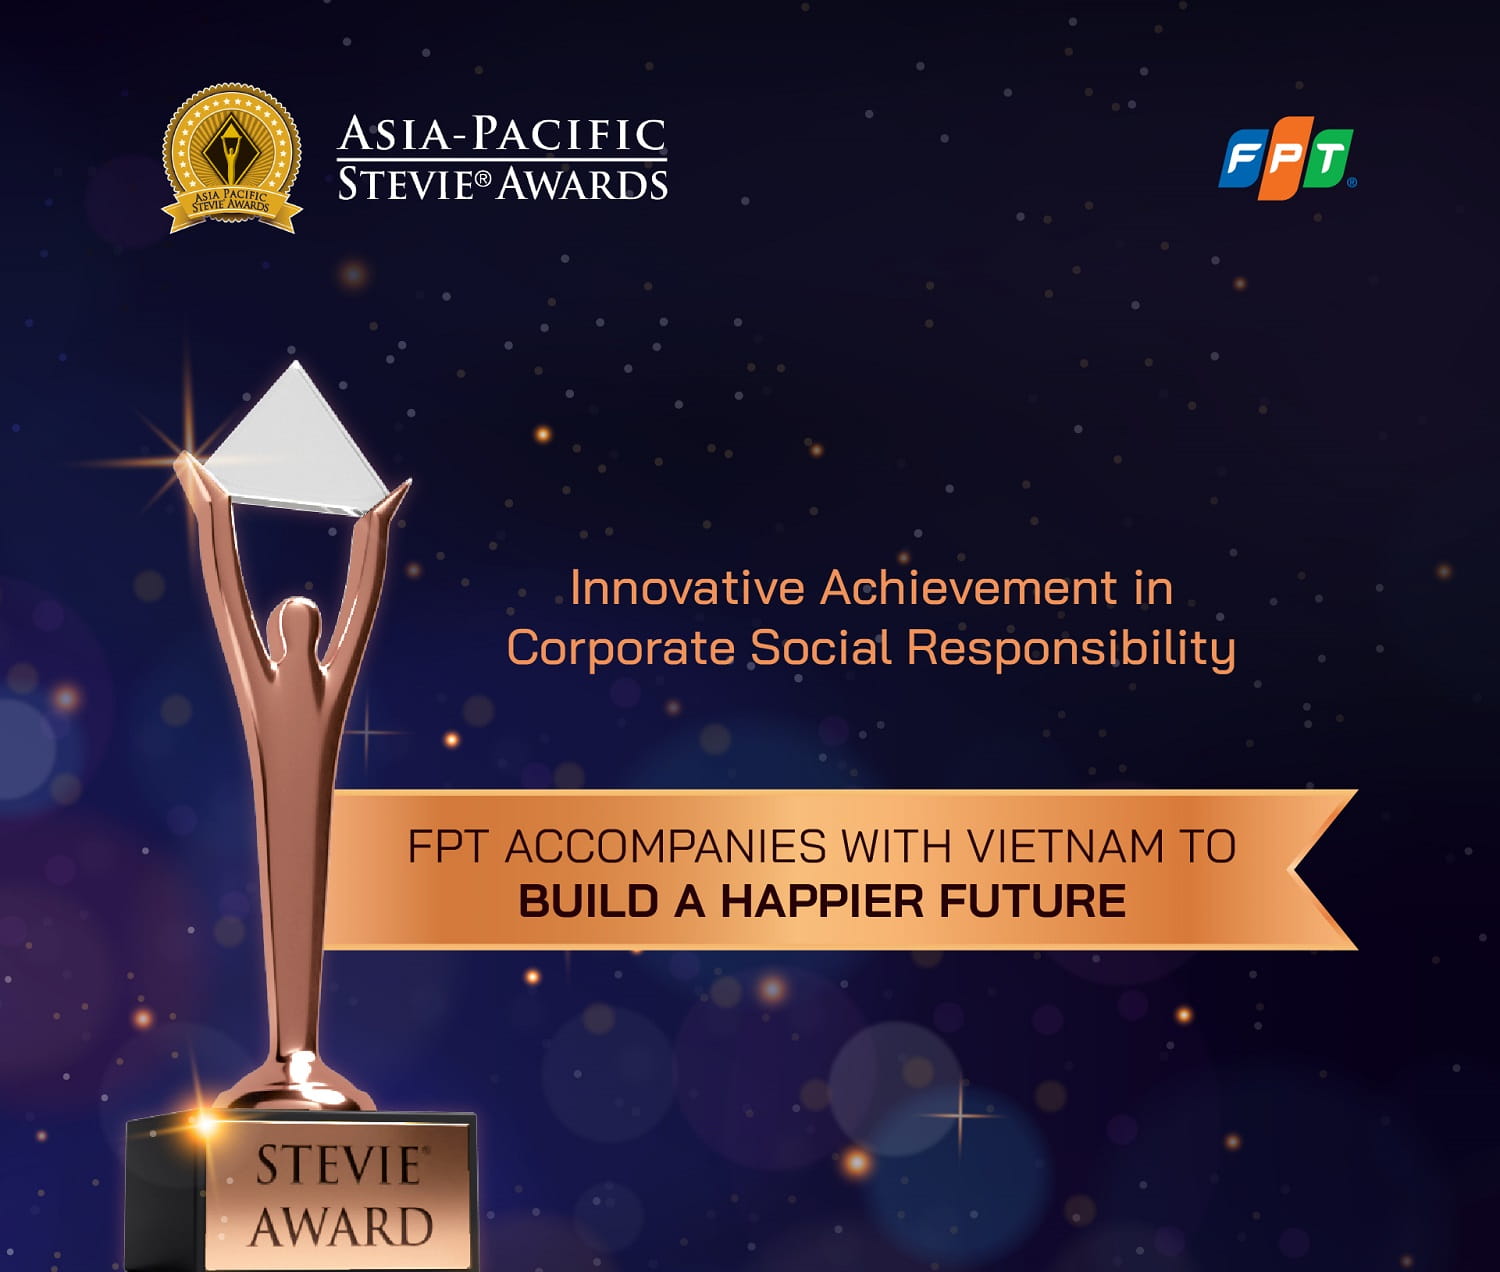 FPT was honored with an award at the Asia Pacific Stevie Awards for accompanying Vietnam in creating a happy future